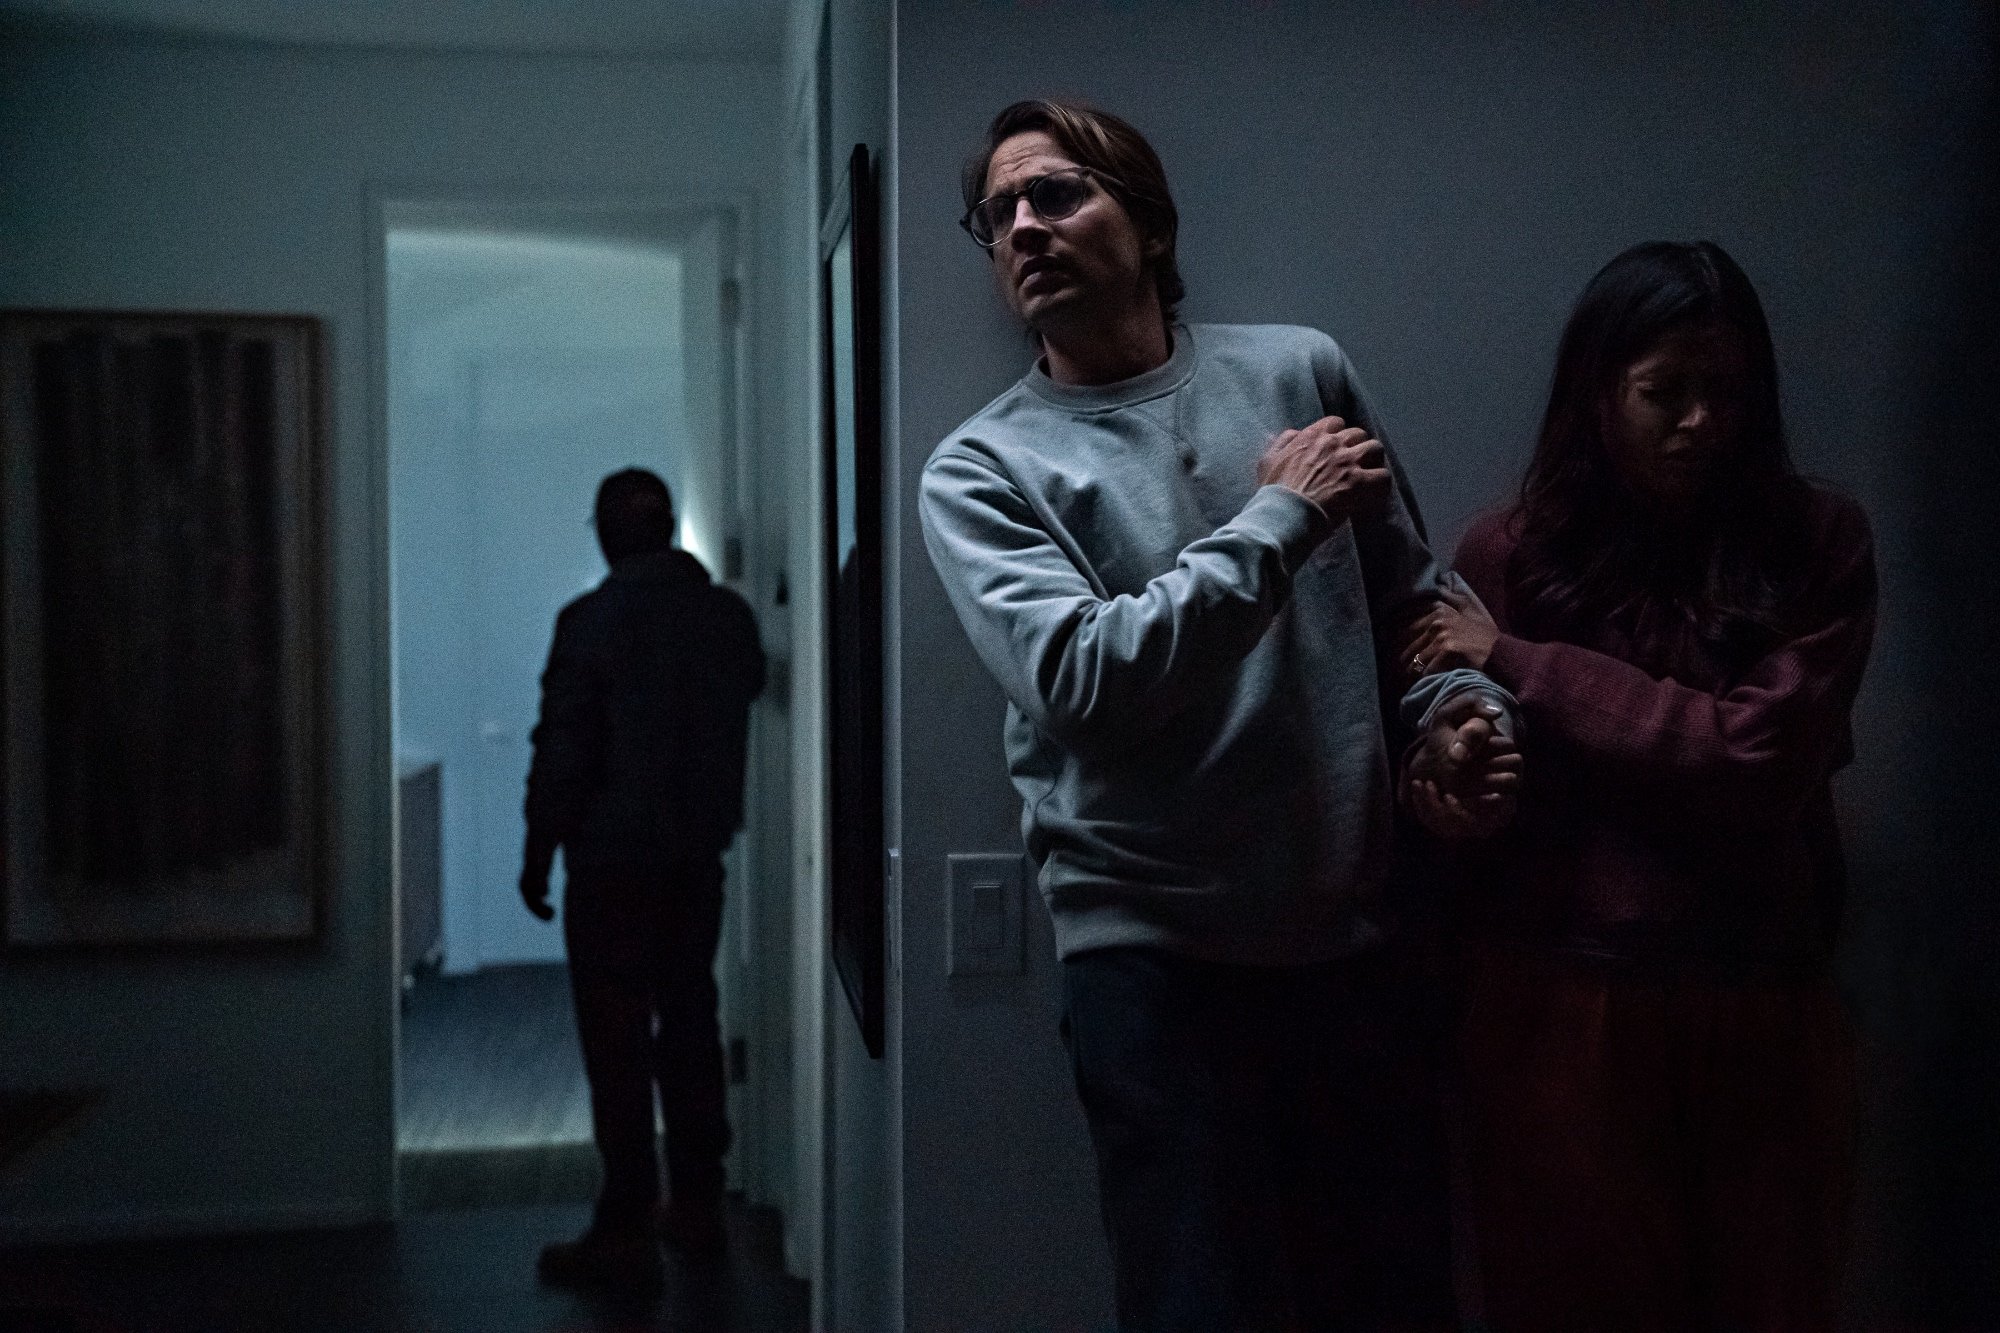 Horror-Thriller Film 'Intruders' Plays with the Home Invasion Genre